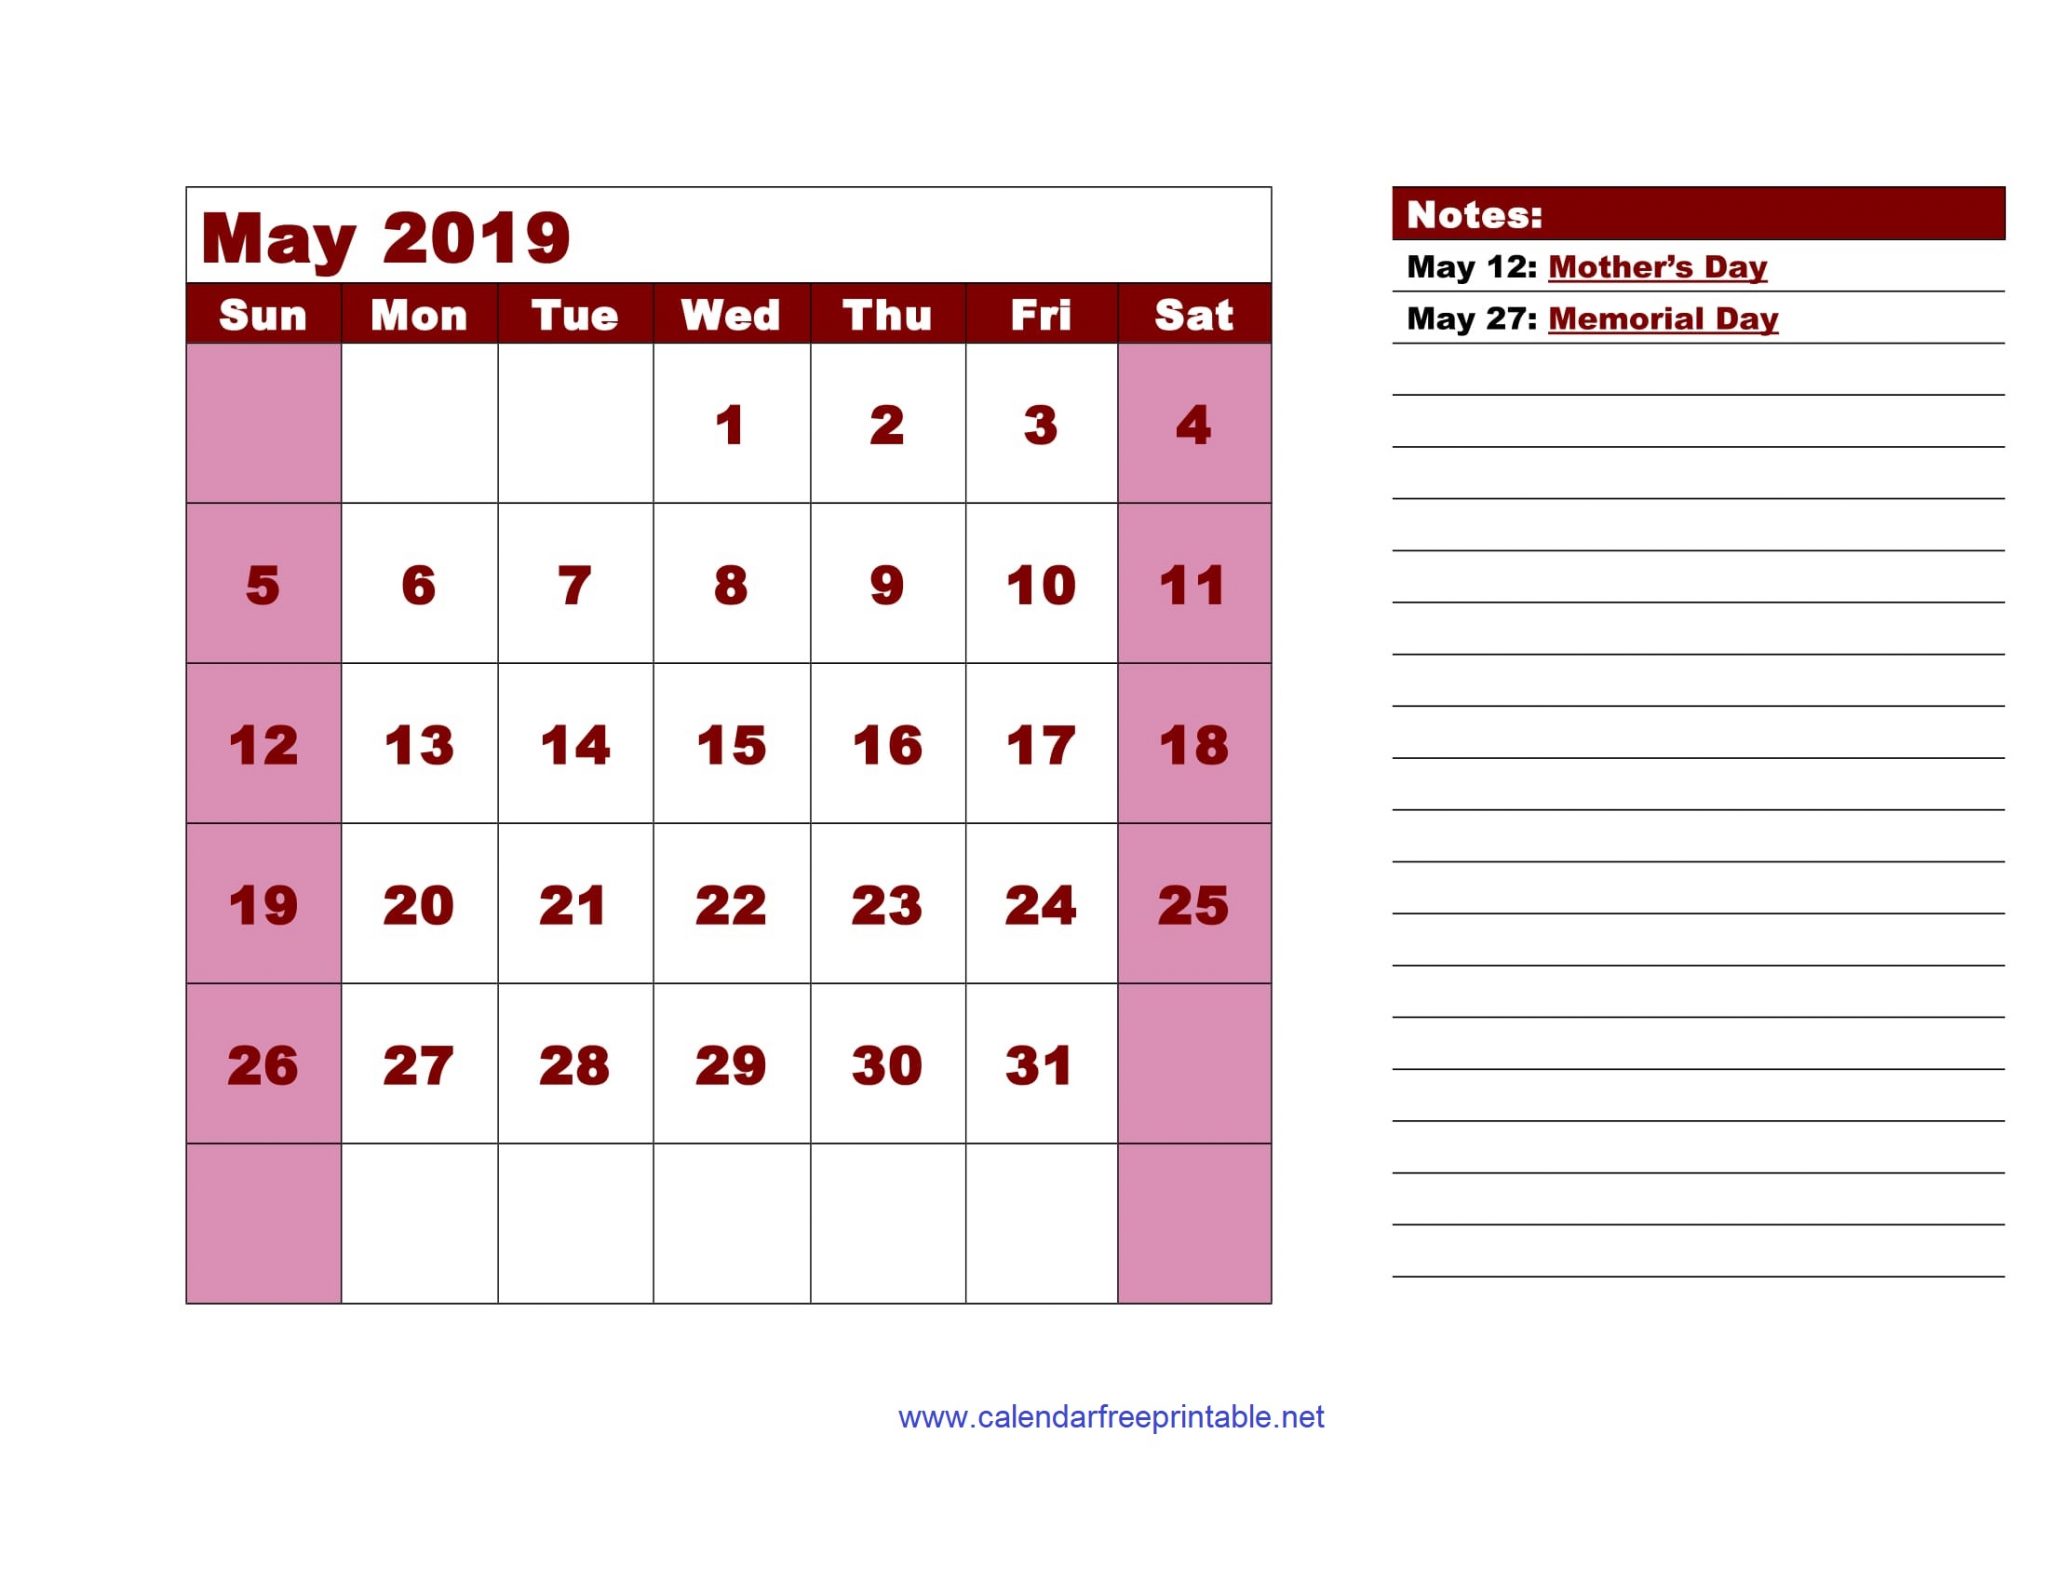 Monthly Calendar Template for May 2019